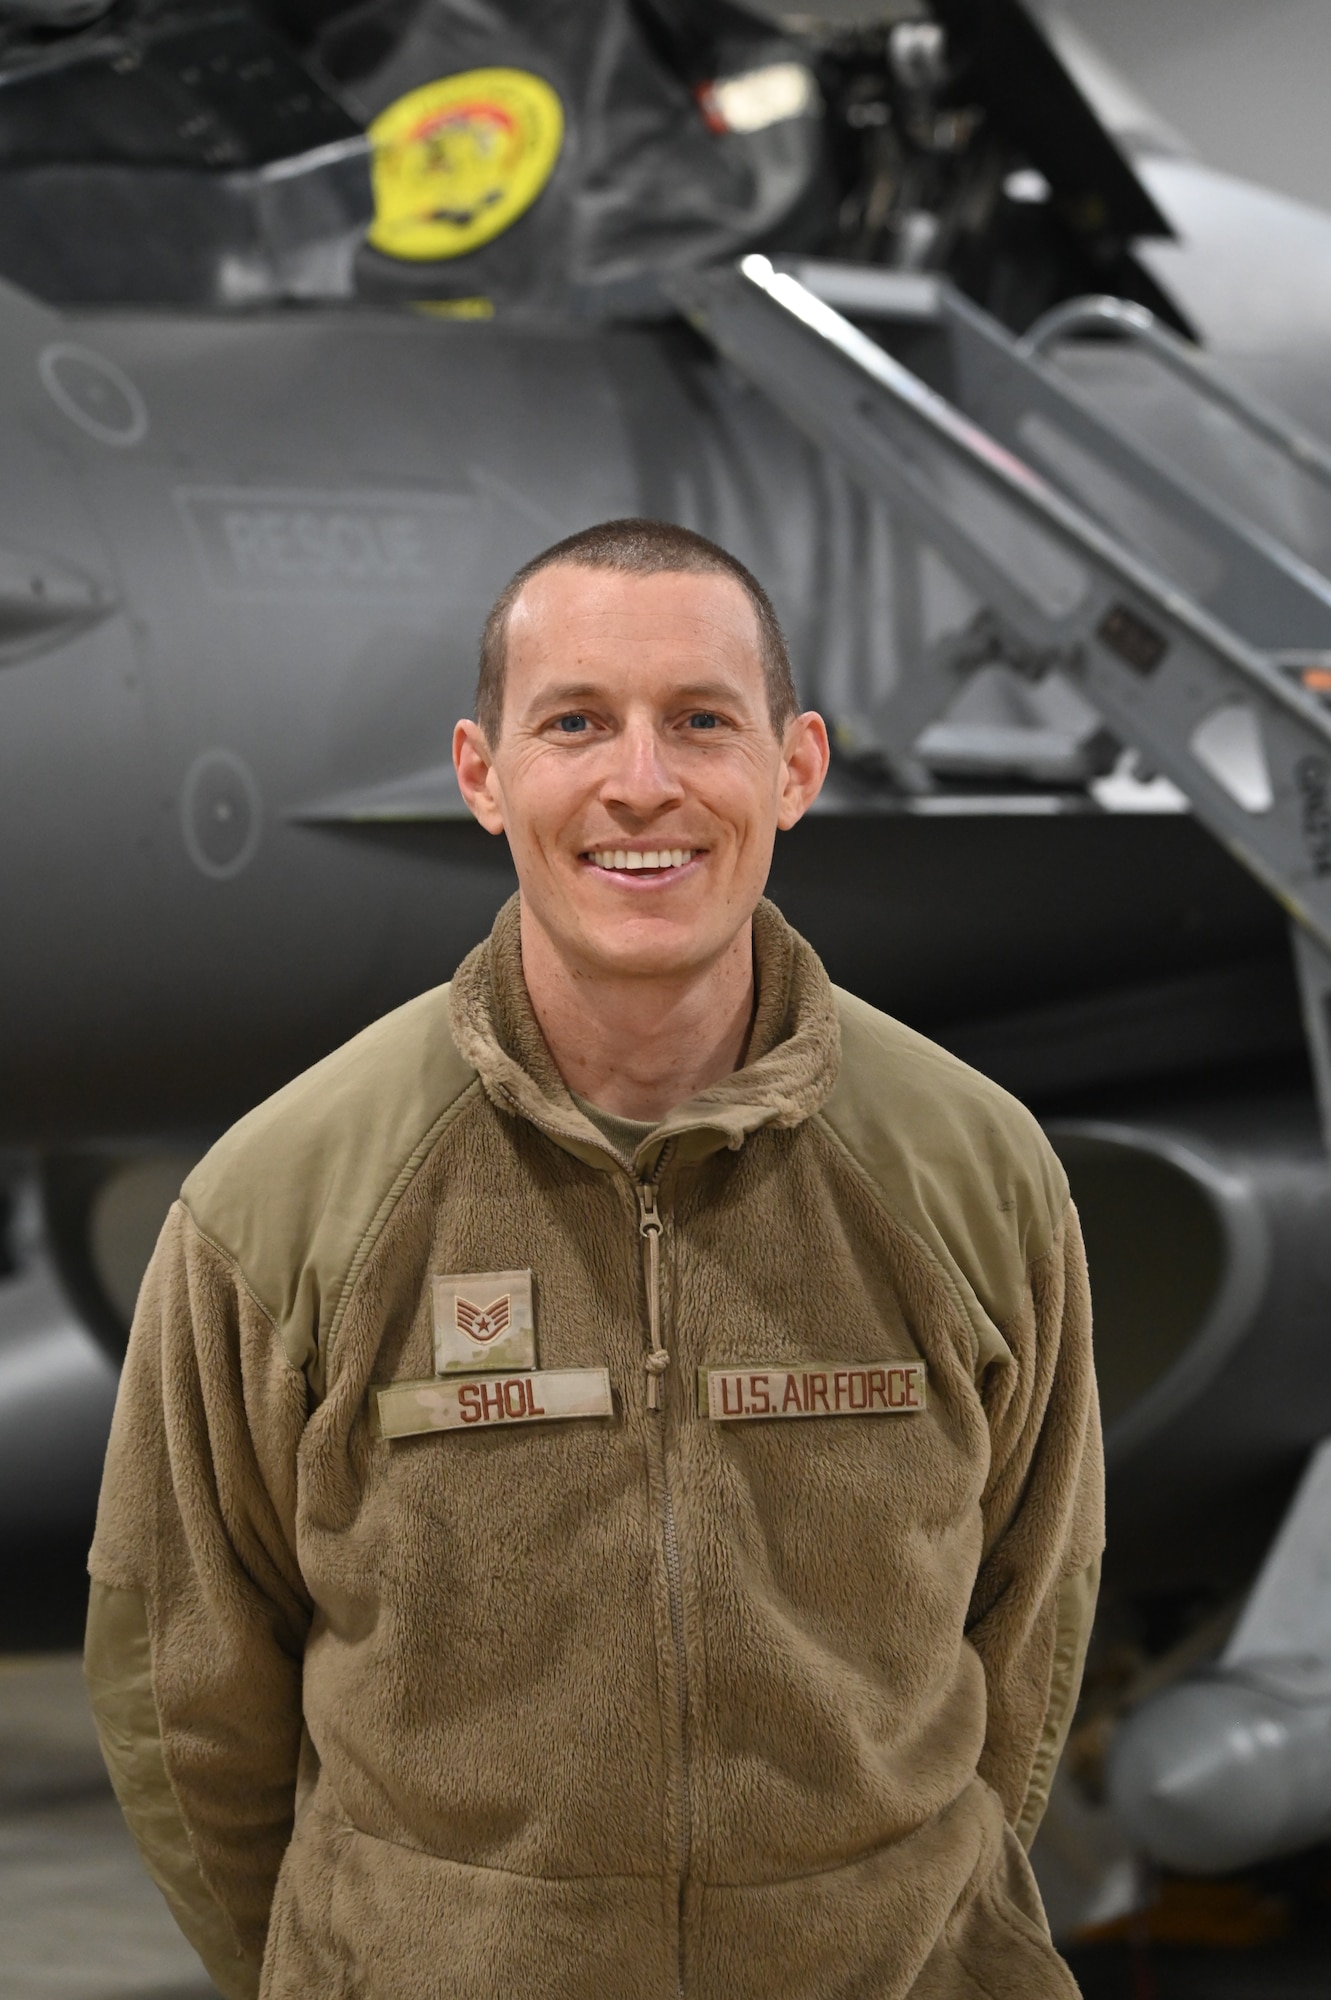 U.S. Air National Guard tactical aircraft maintenance specialist, Staff Sgt. Paul Shol, poses for a photo in front of an F-16 Fighting Falcon assigned to the 148th Fighter Wing, Minnesota Air National Guard, on February 04, 2023. Shol is one of seven airmen assigned to the 148th Fighter Wing who earned the highest possible ASVAB AFQT score of 99.